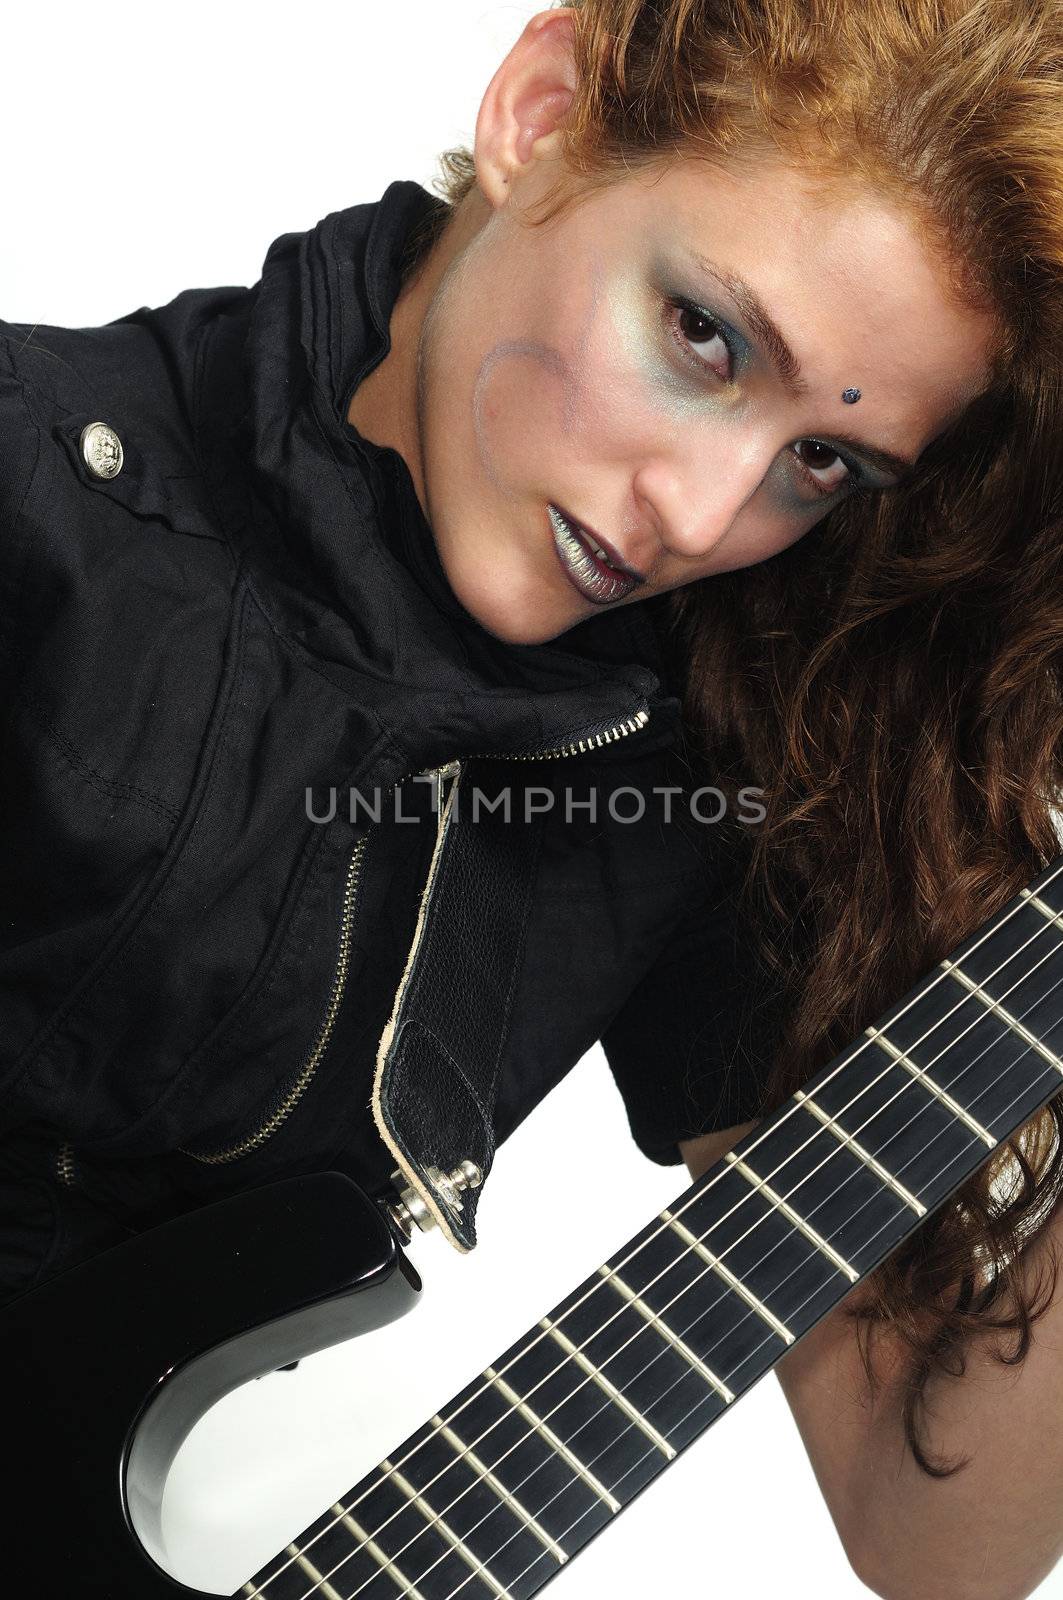 Funky female playing guitar  by rgbspace